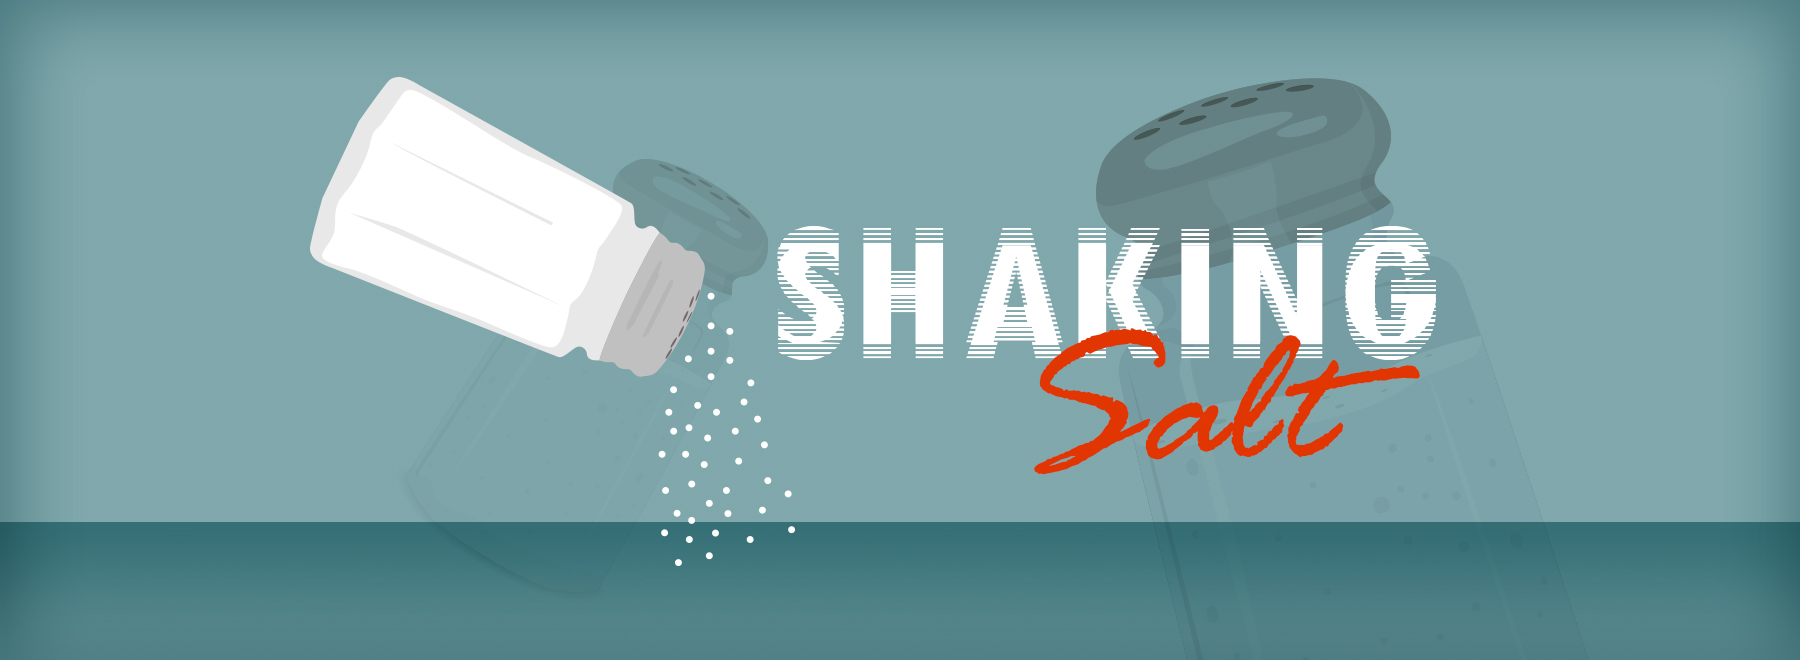 Graphic of salt shaker with the text Shaking Salt